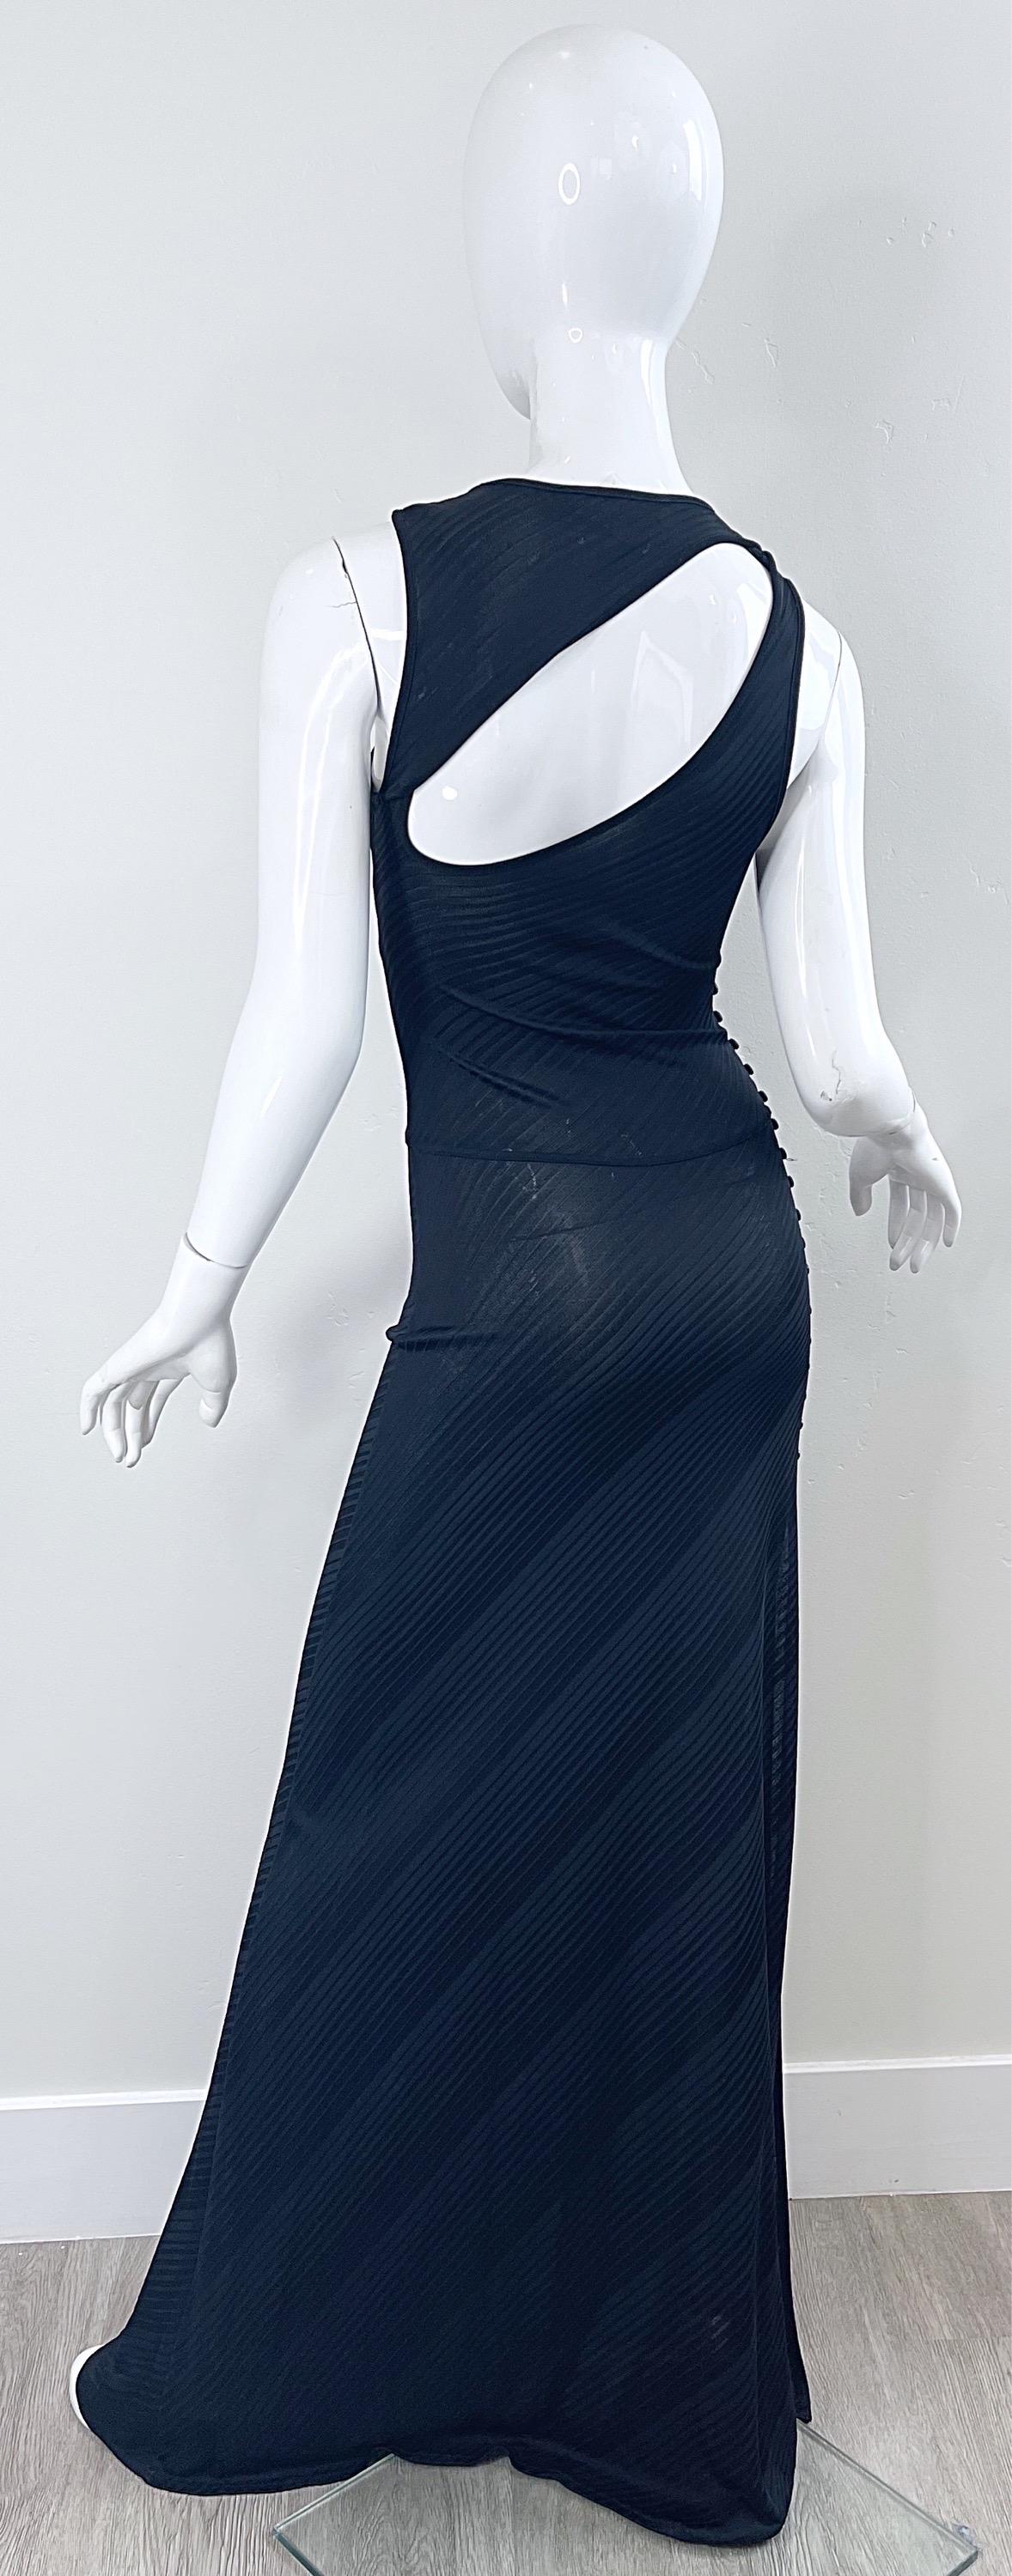 Gianni Versace Versus Spring 2001 Black Cut Out Sleeveless Vintage Jersey Gown  For Sale 8